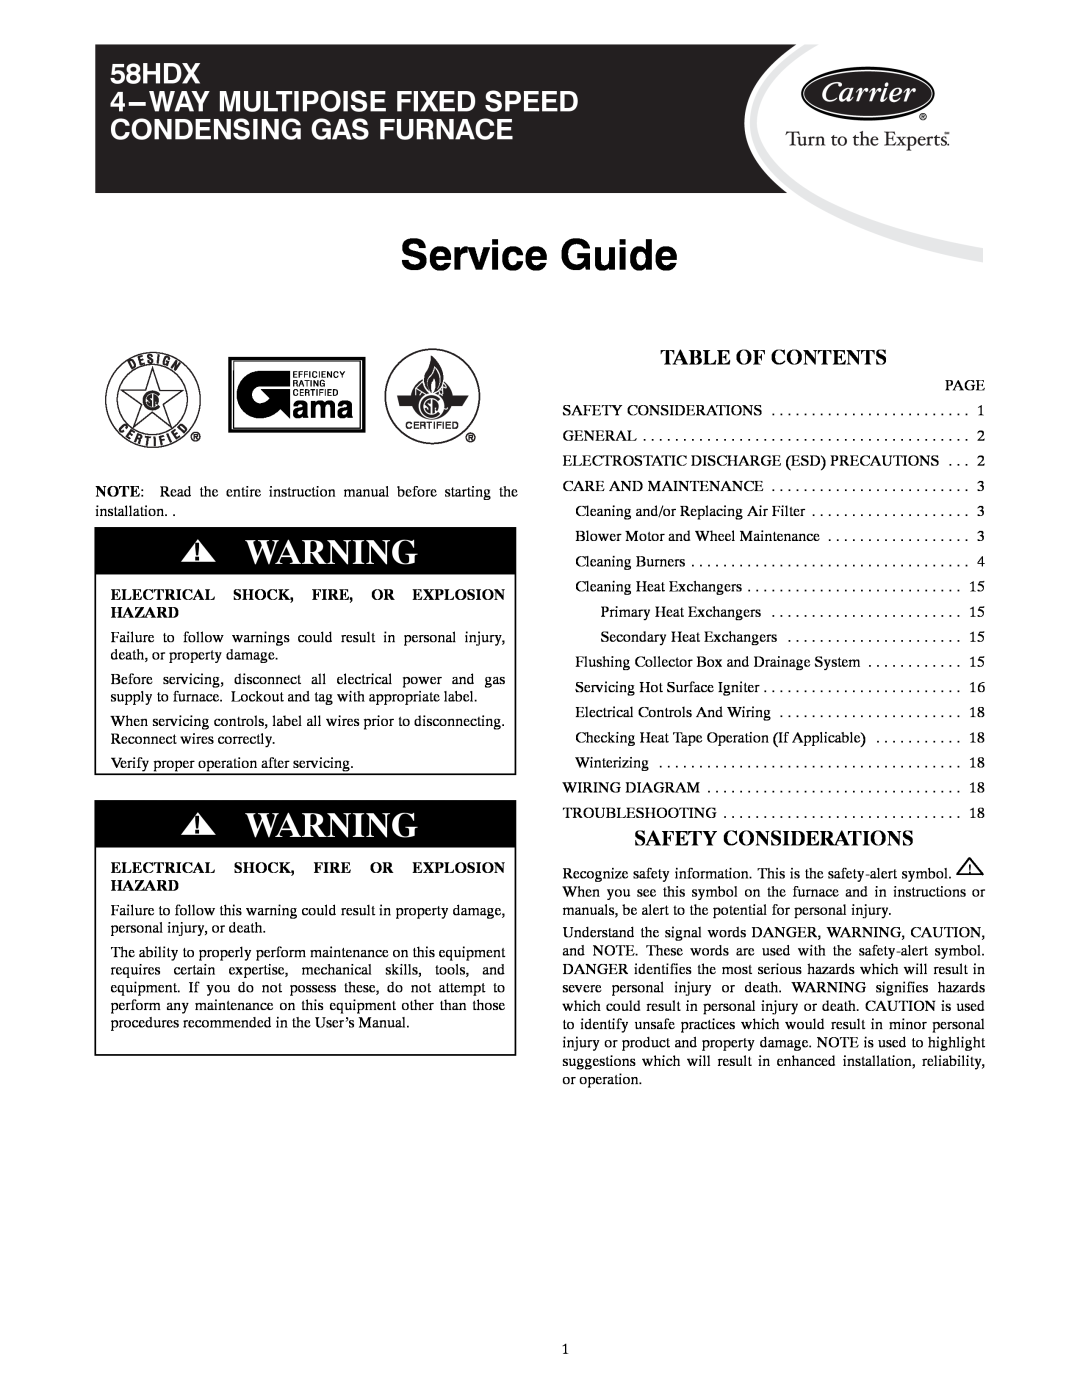 Carrier 58HDX instruction manual Table Of Contents, Safety Considerations, Electrical Shock, Fire, Or Explosion Hazard 